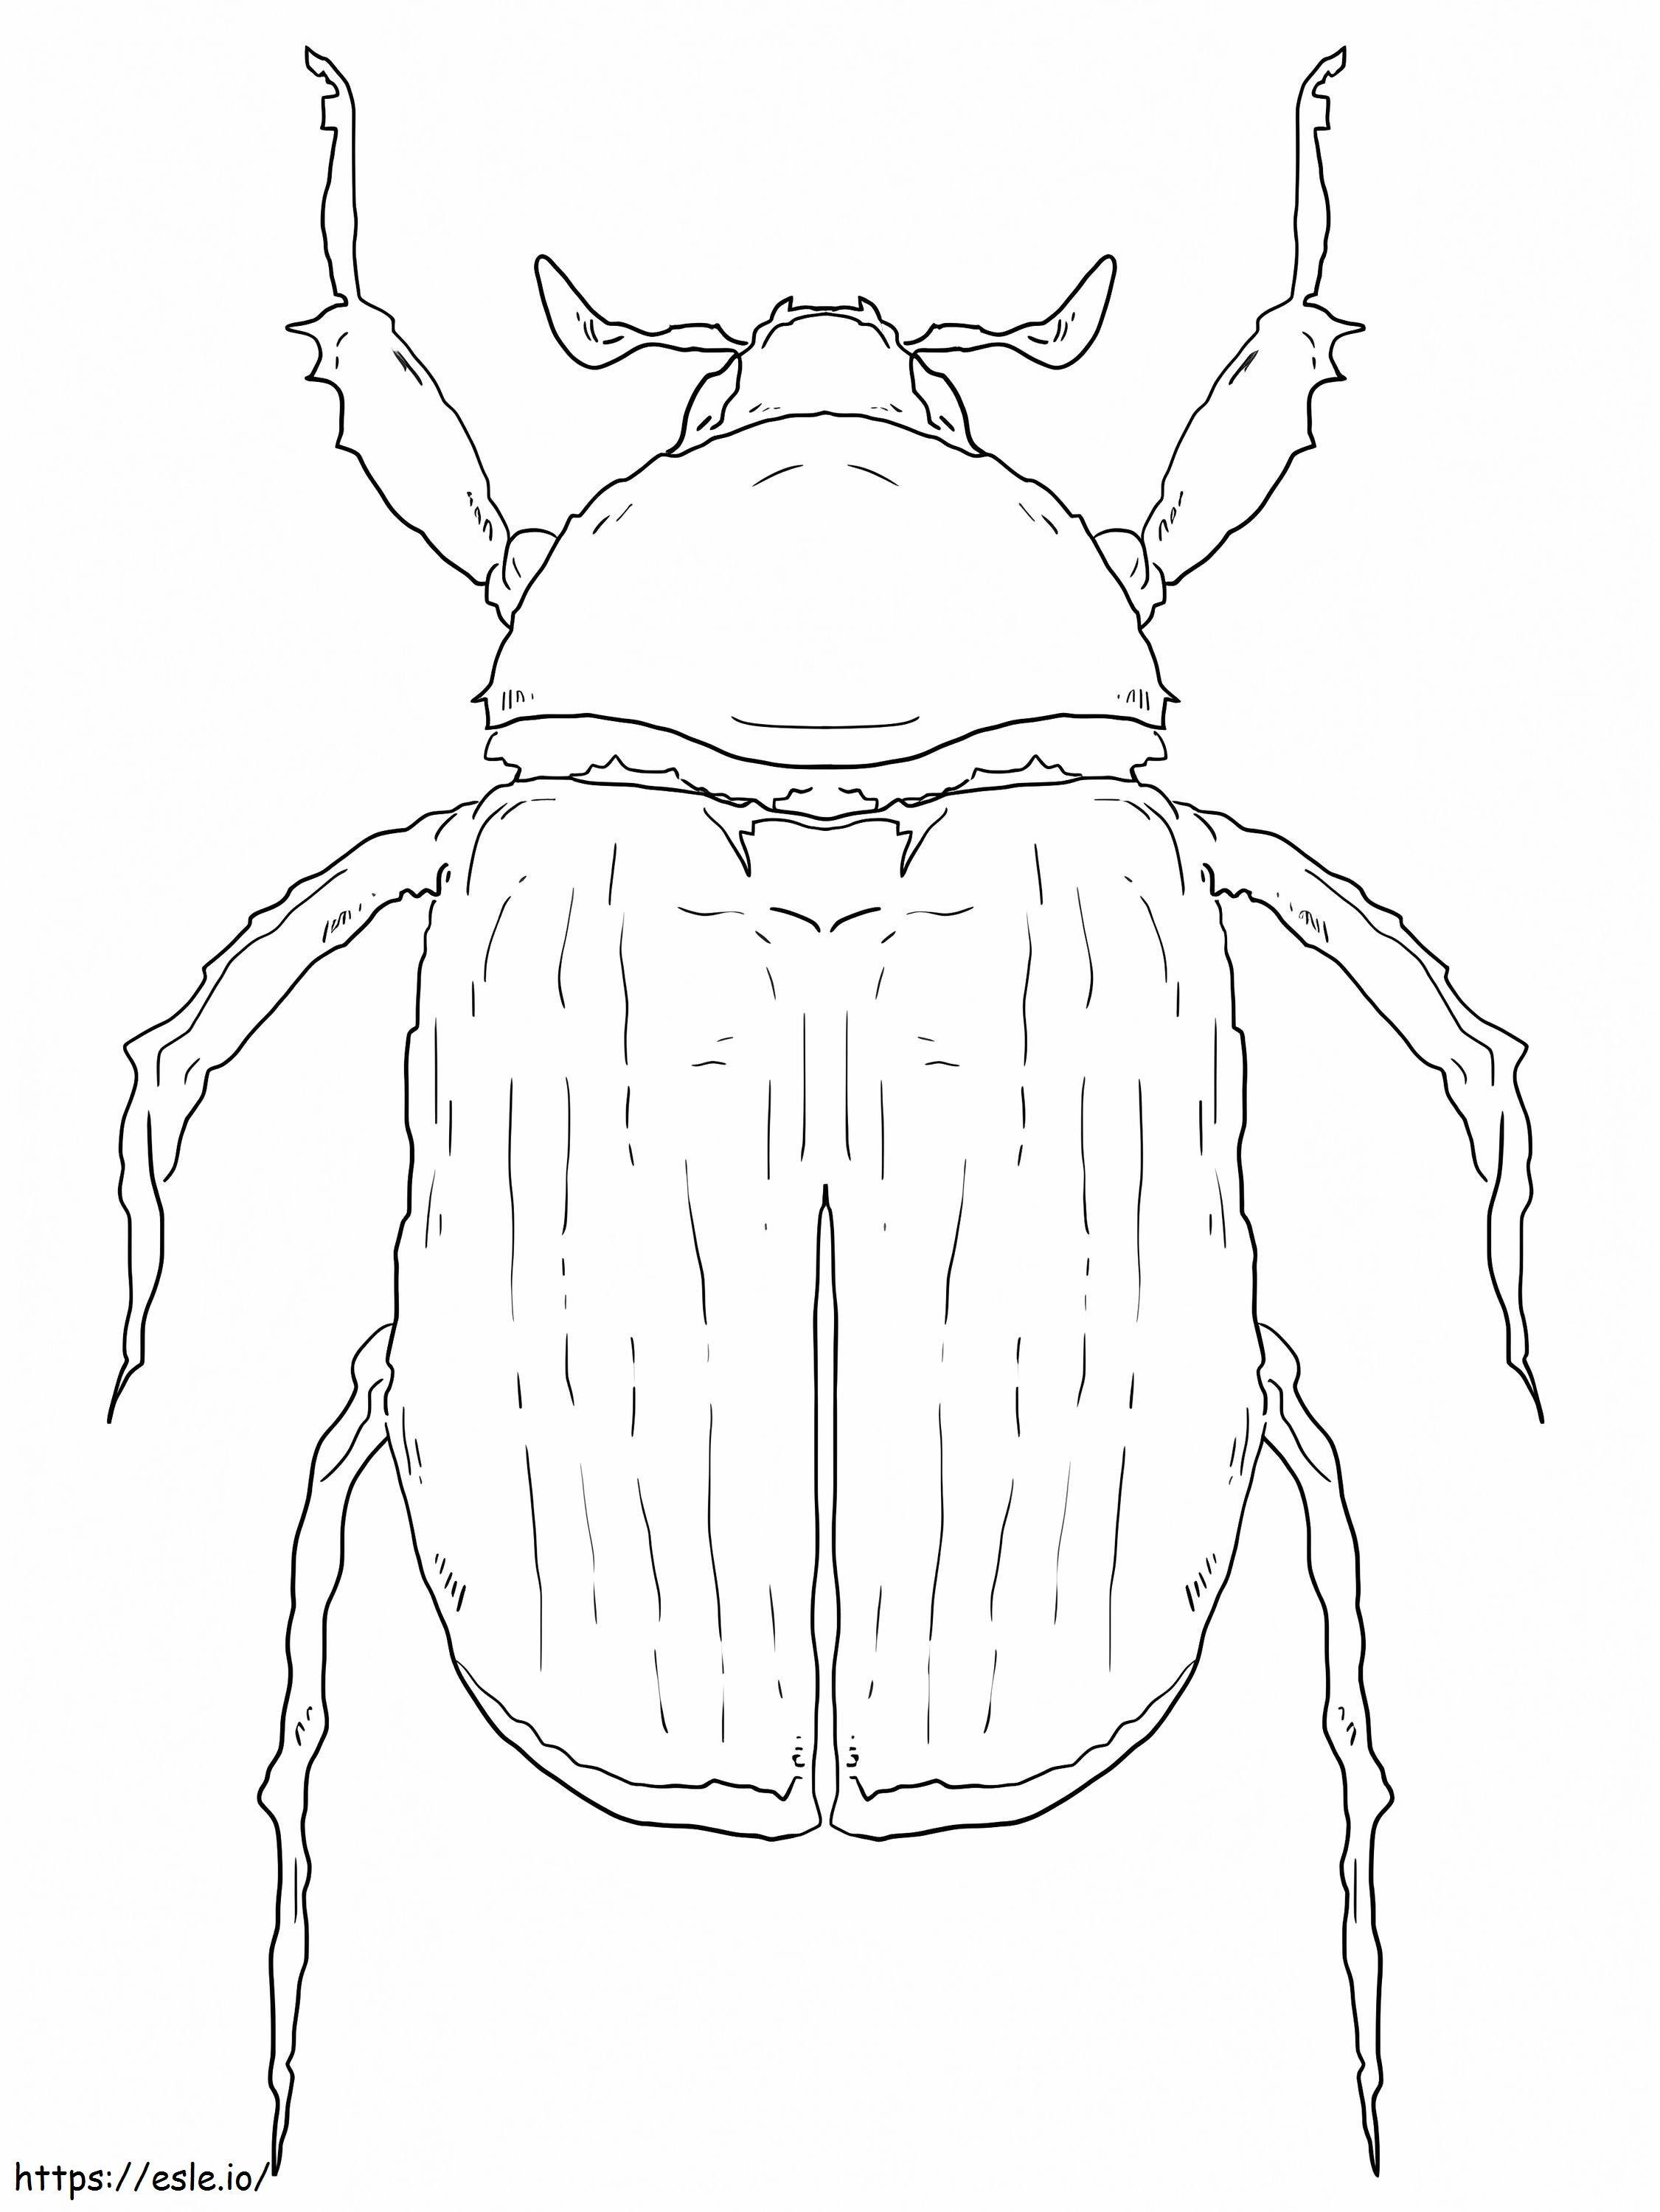 Green Scarab Beetle coloring page